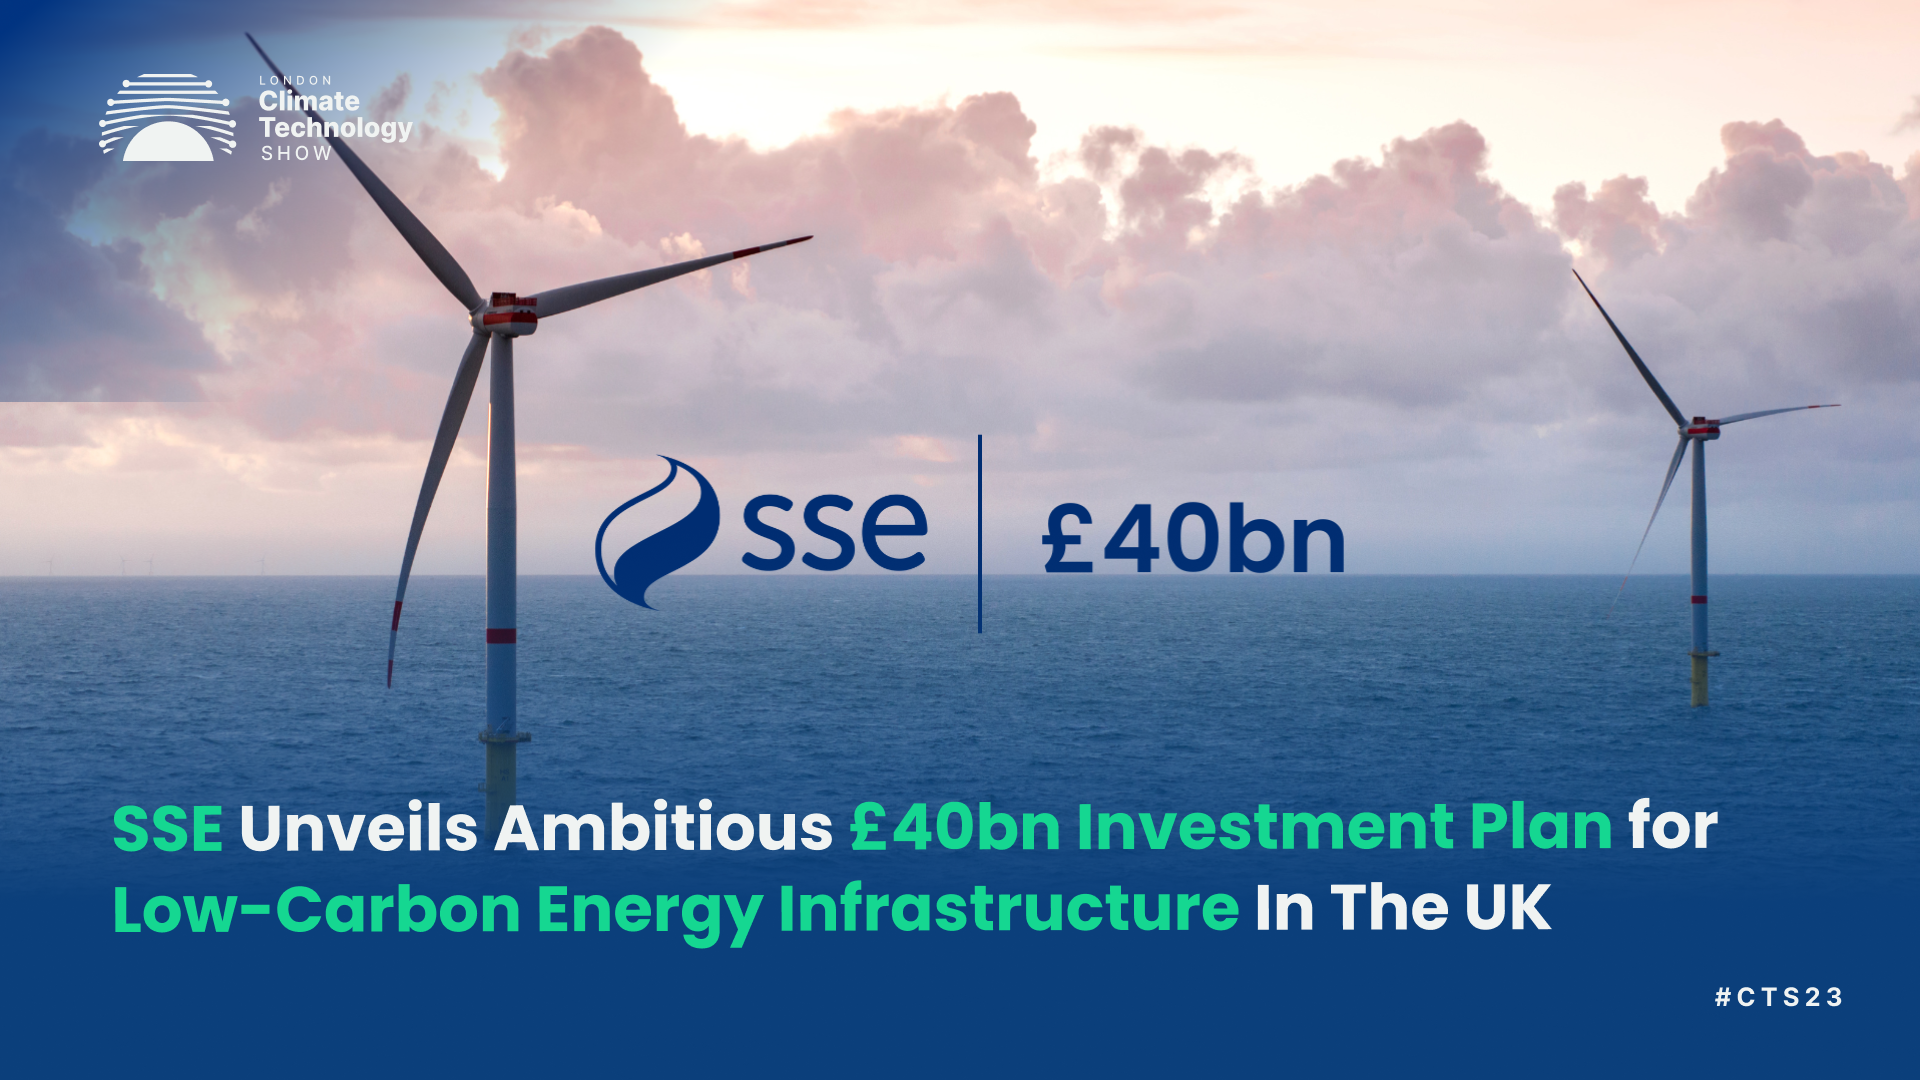 SSE Unveils Ambitious £40bn Investment Plan for Low-Carbon Energy Infrastructure In The UK